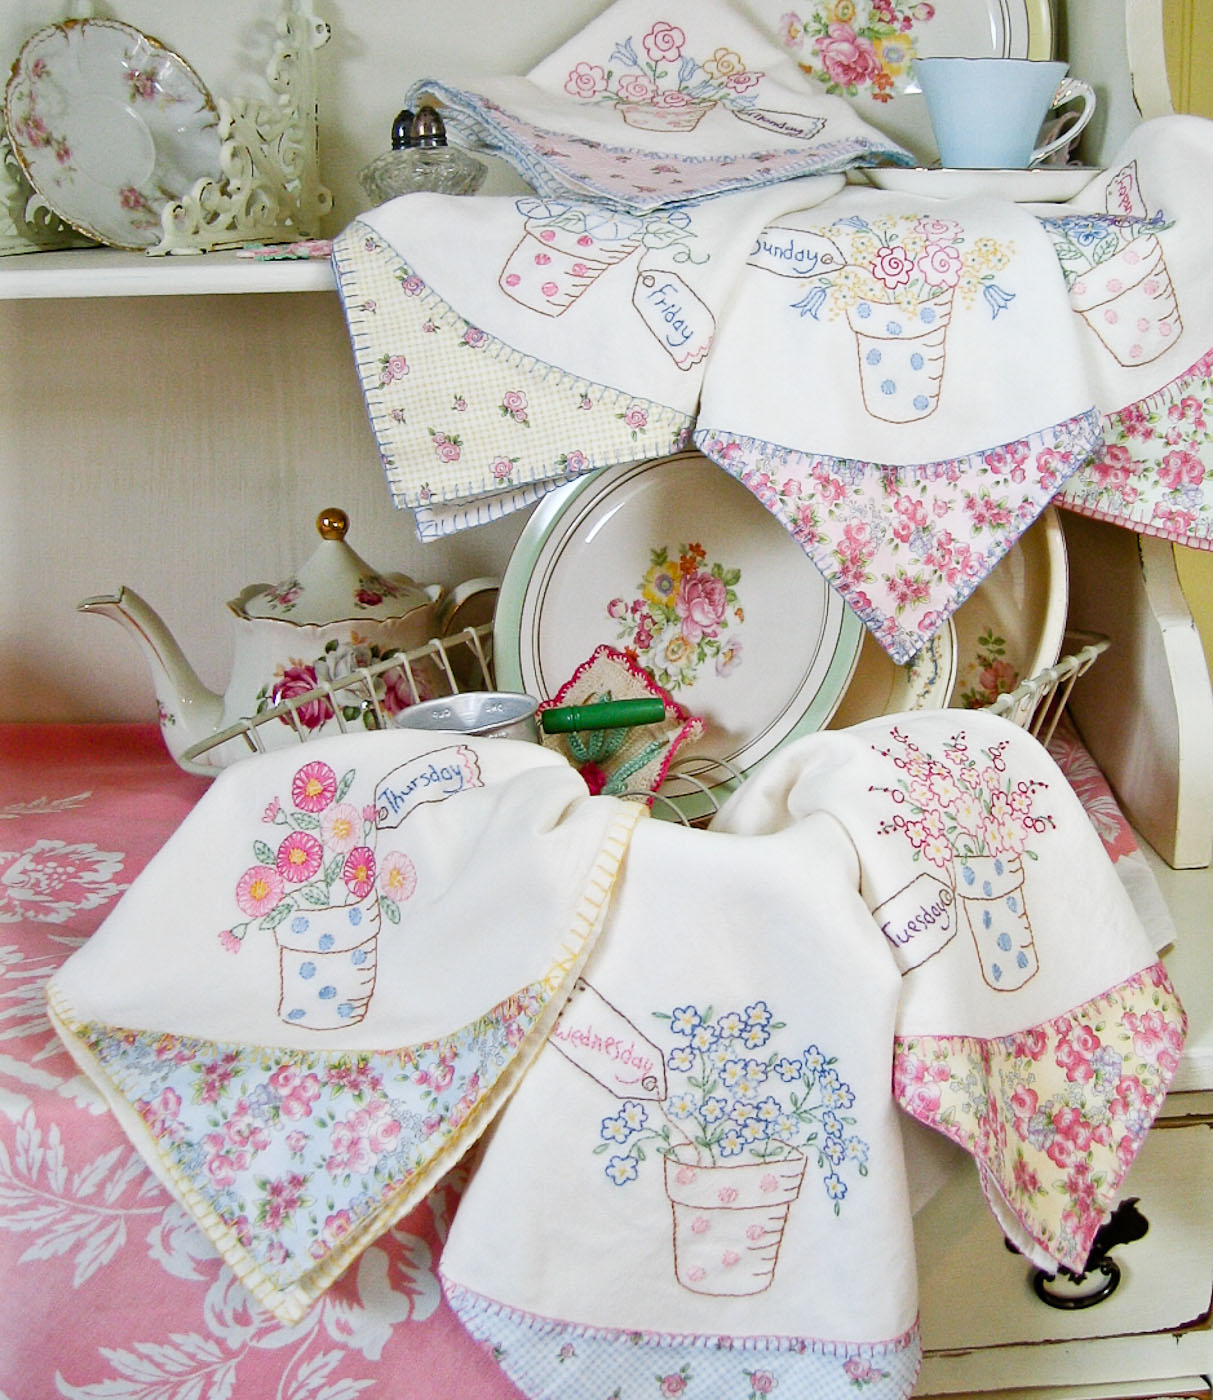 Free Hand Embroidery Patterns For Tea Towels Cottage Flower Pot Tea Towels